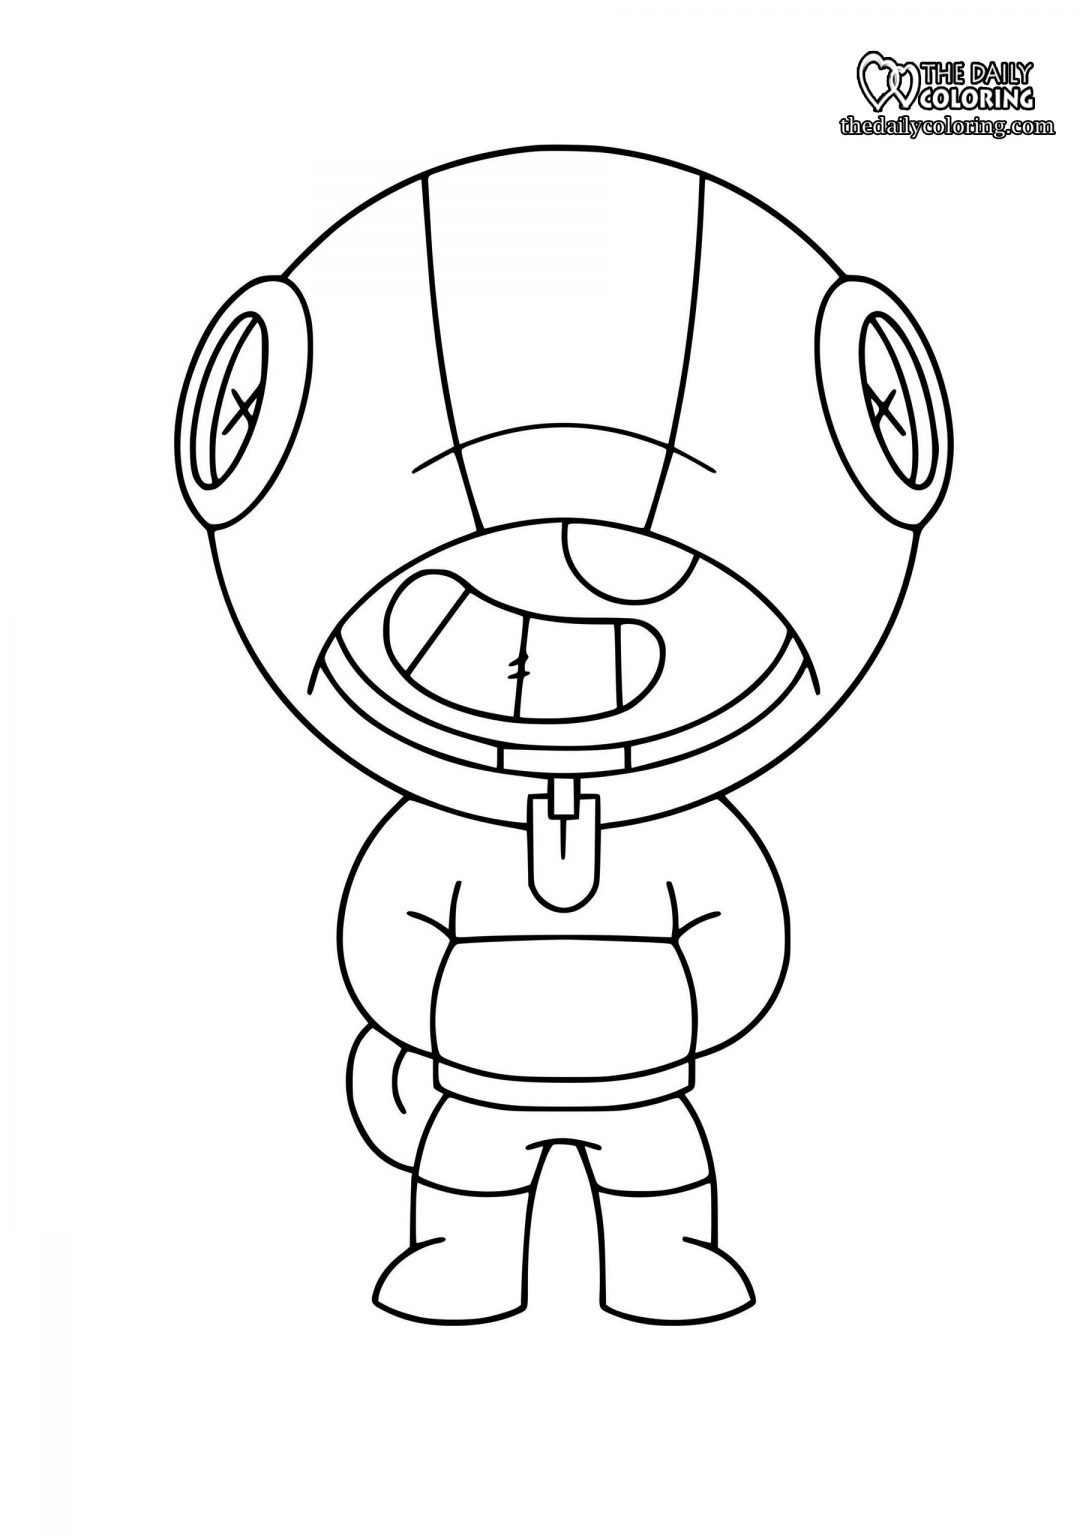 Brawl Stars Coloring Pages - The Daily Coloring